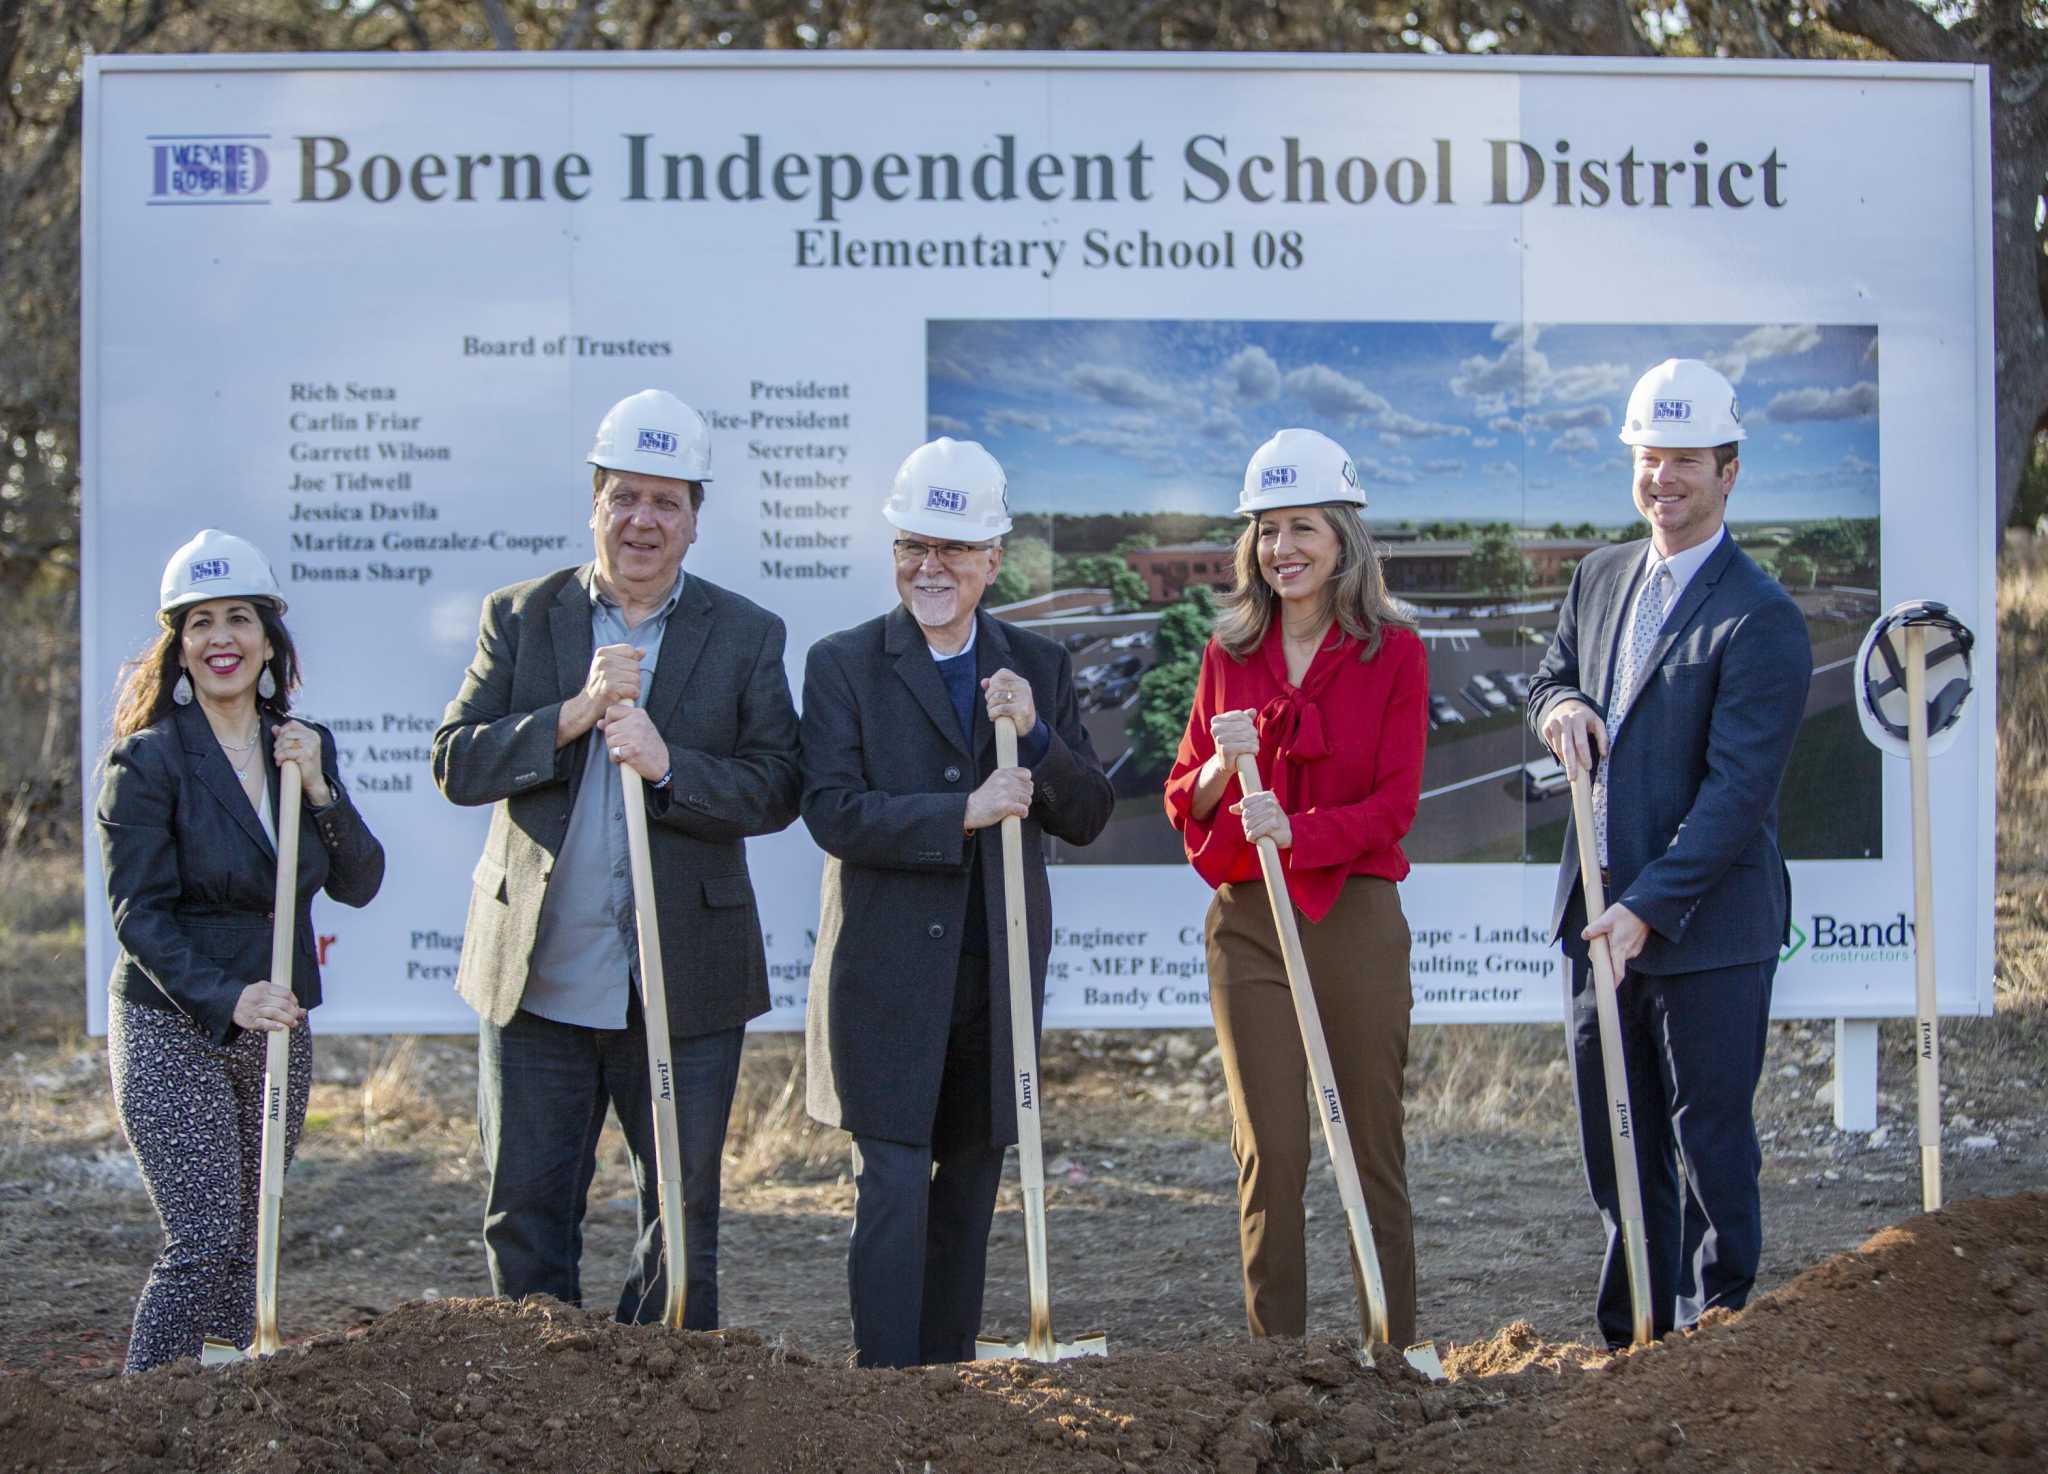 Burgeoning Boerne ISD breaks ground on 8th elementary amid Hill Country